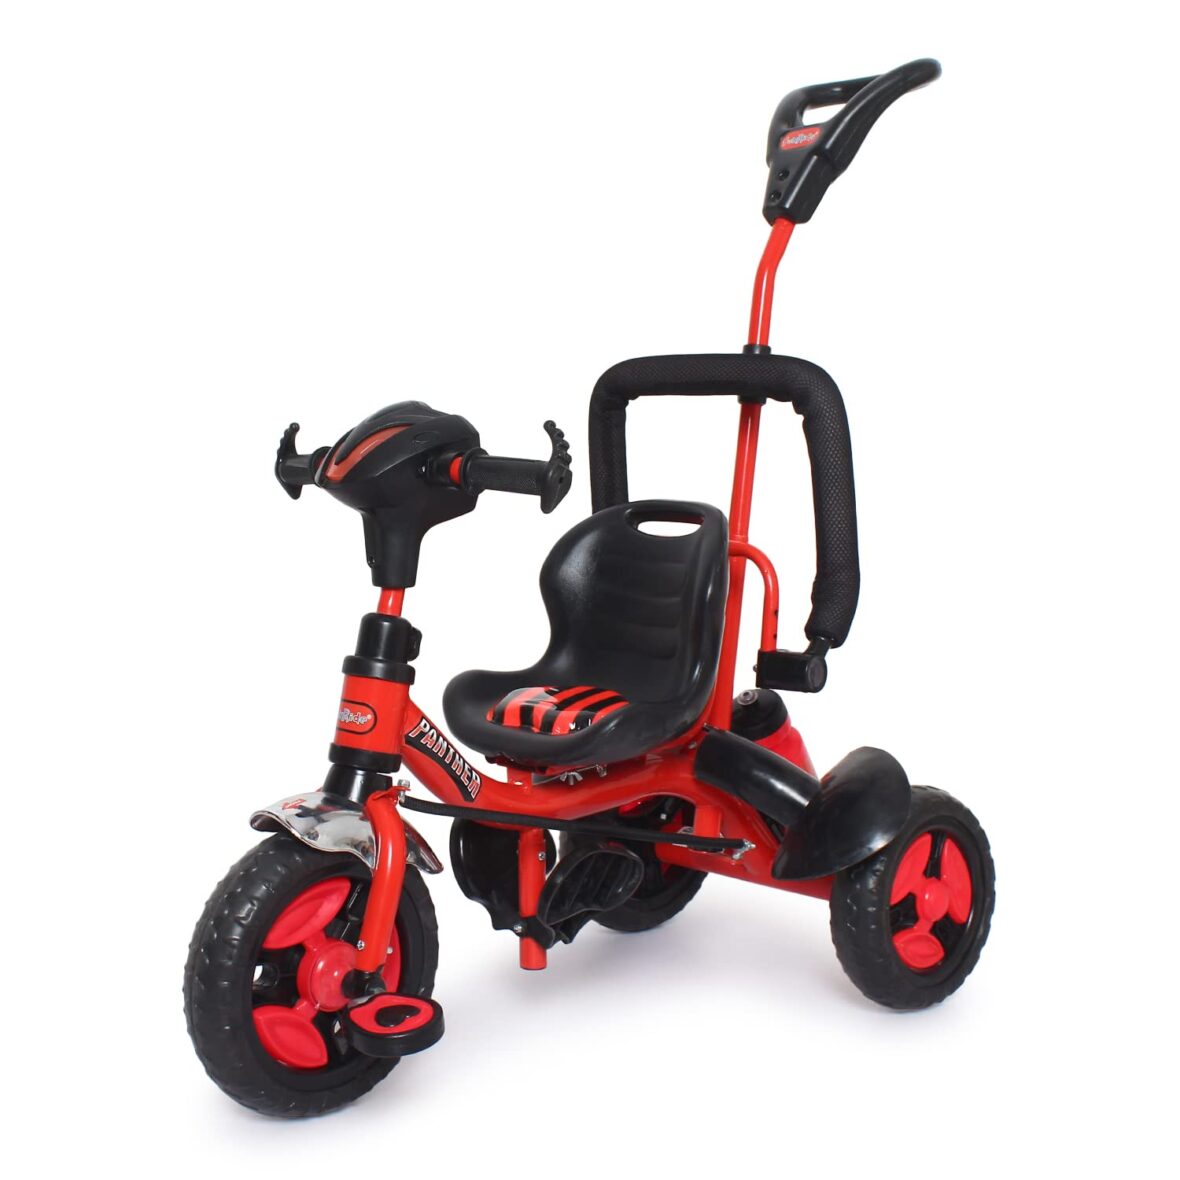 FunRide Kids Tricycle Rider Panther with Removable Parental Control Handle (28)